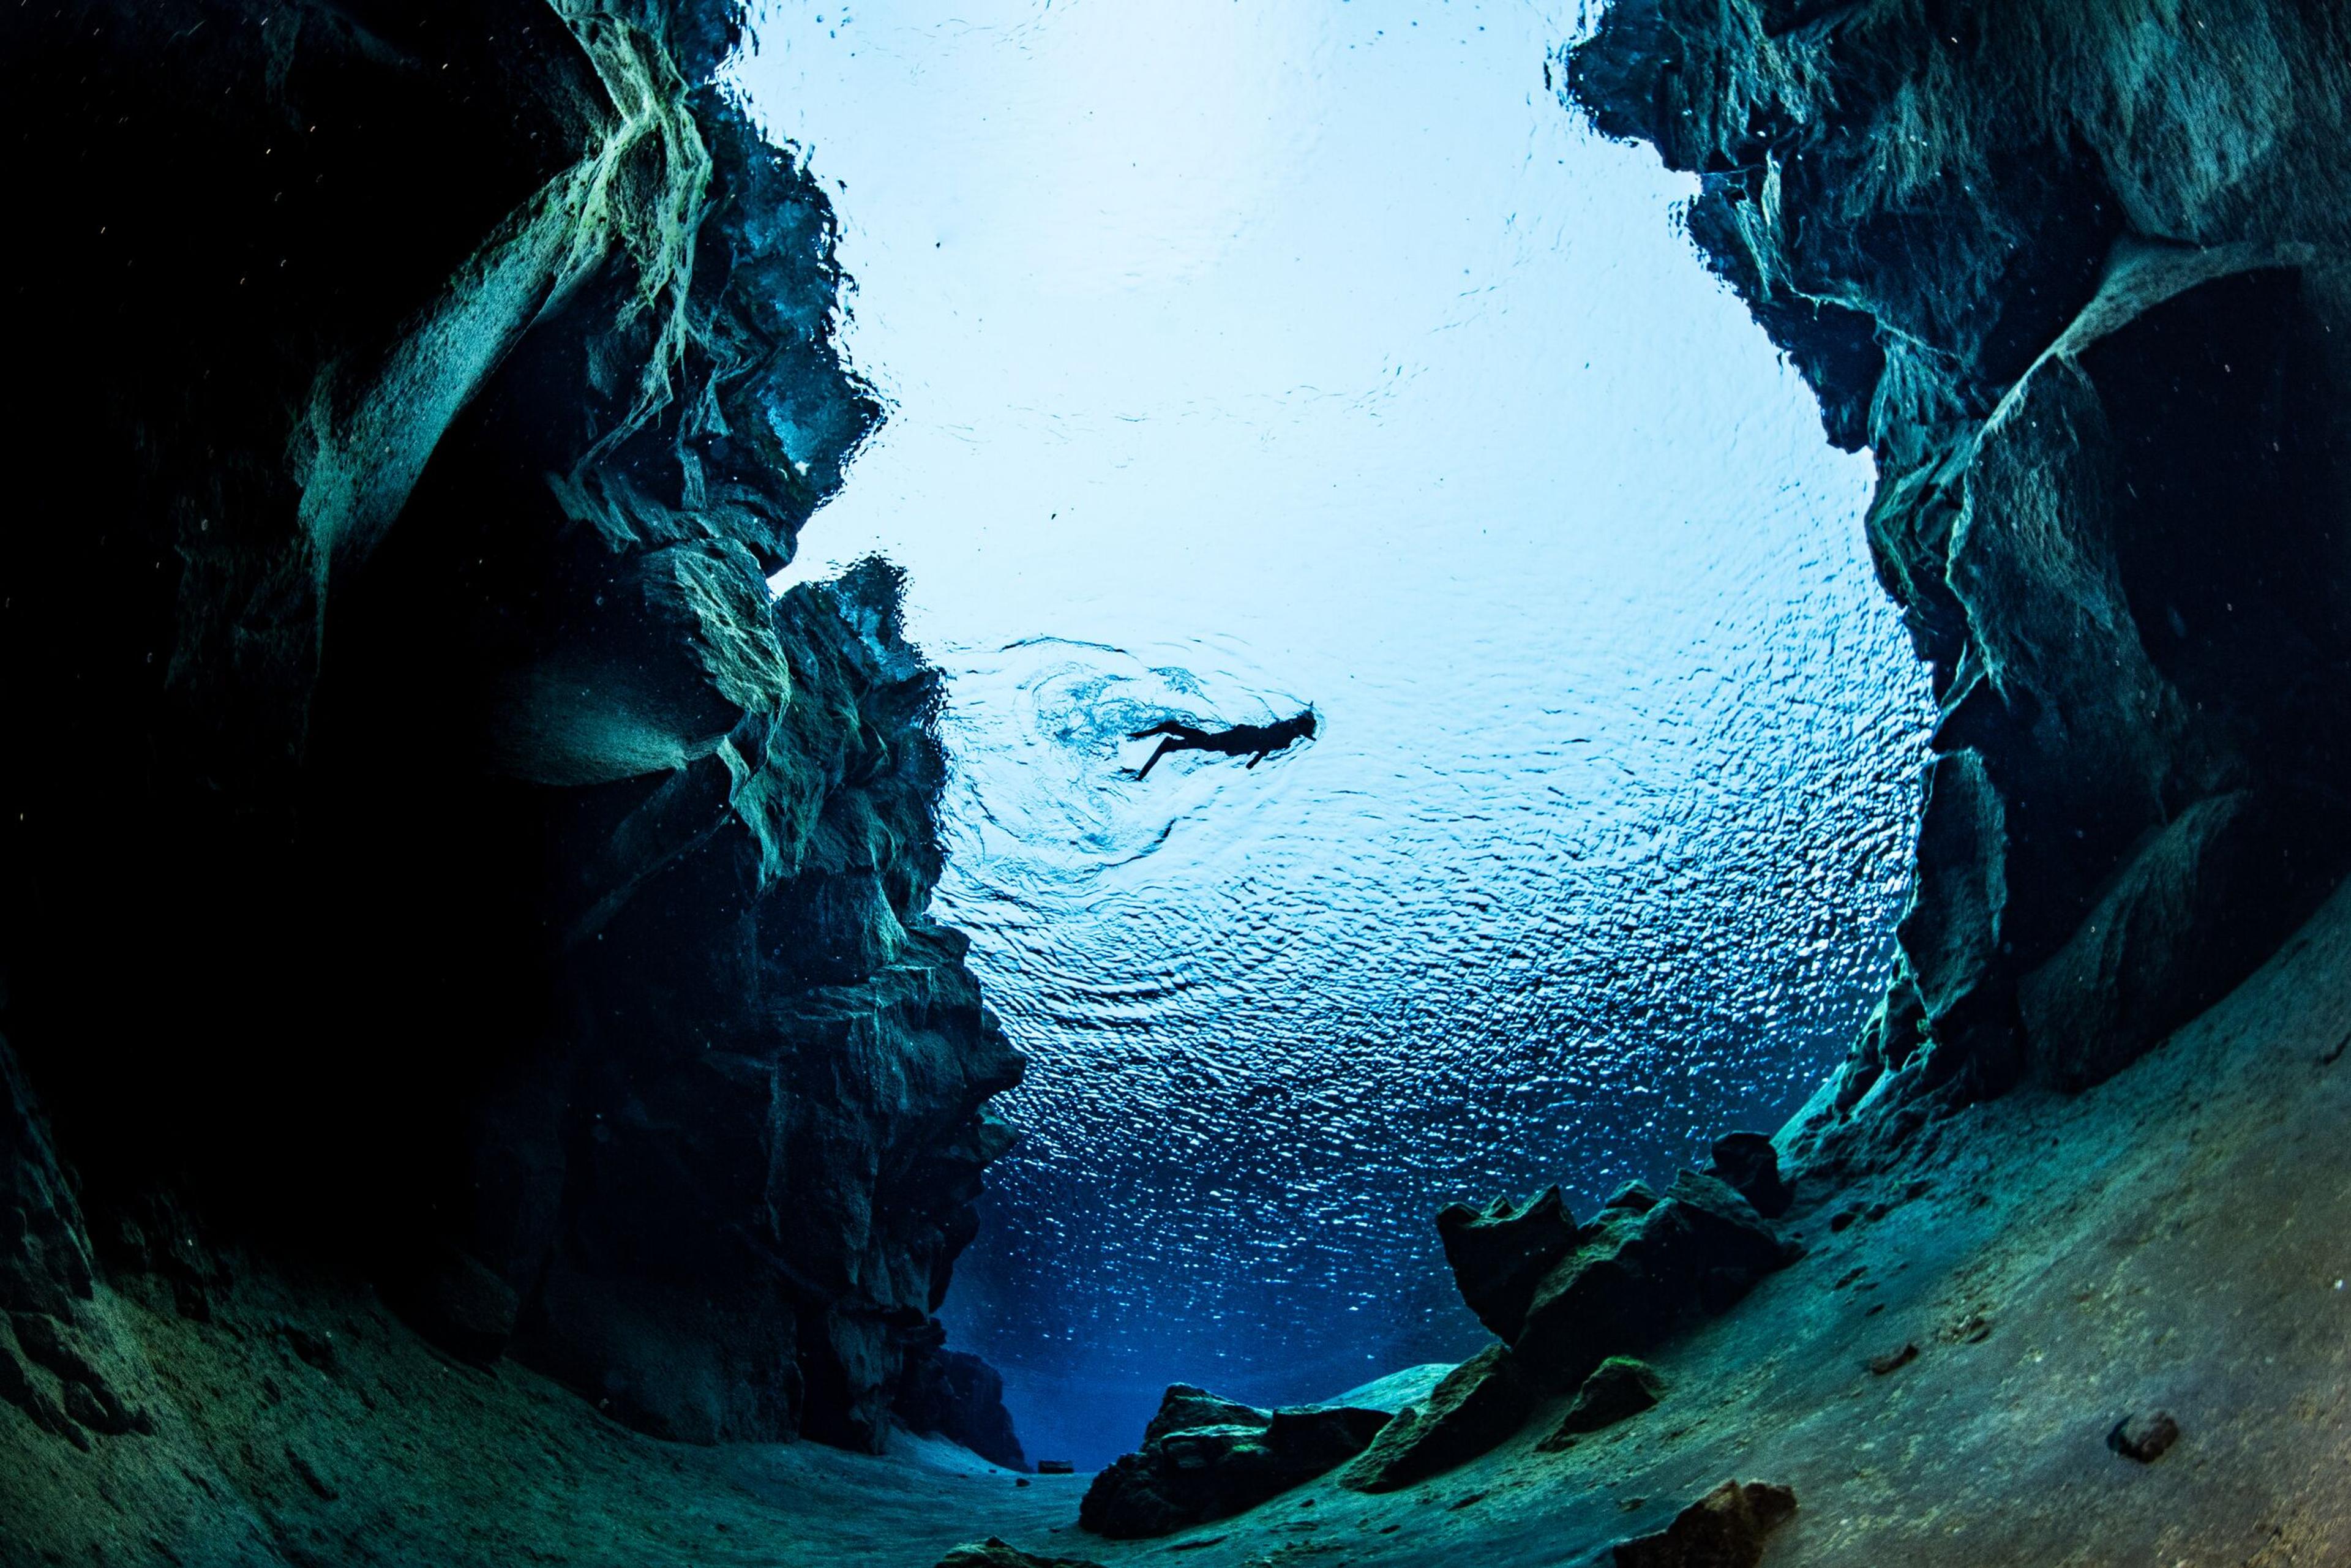 Snorkeler floating on the surface, peering down into the chasm between tectonic plates.